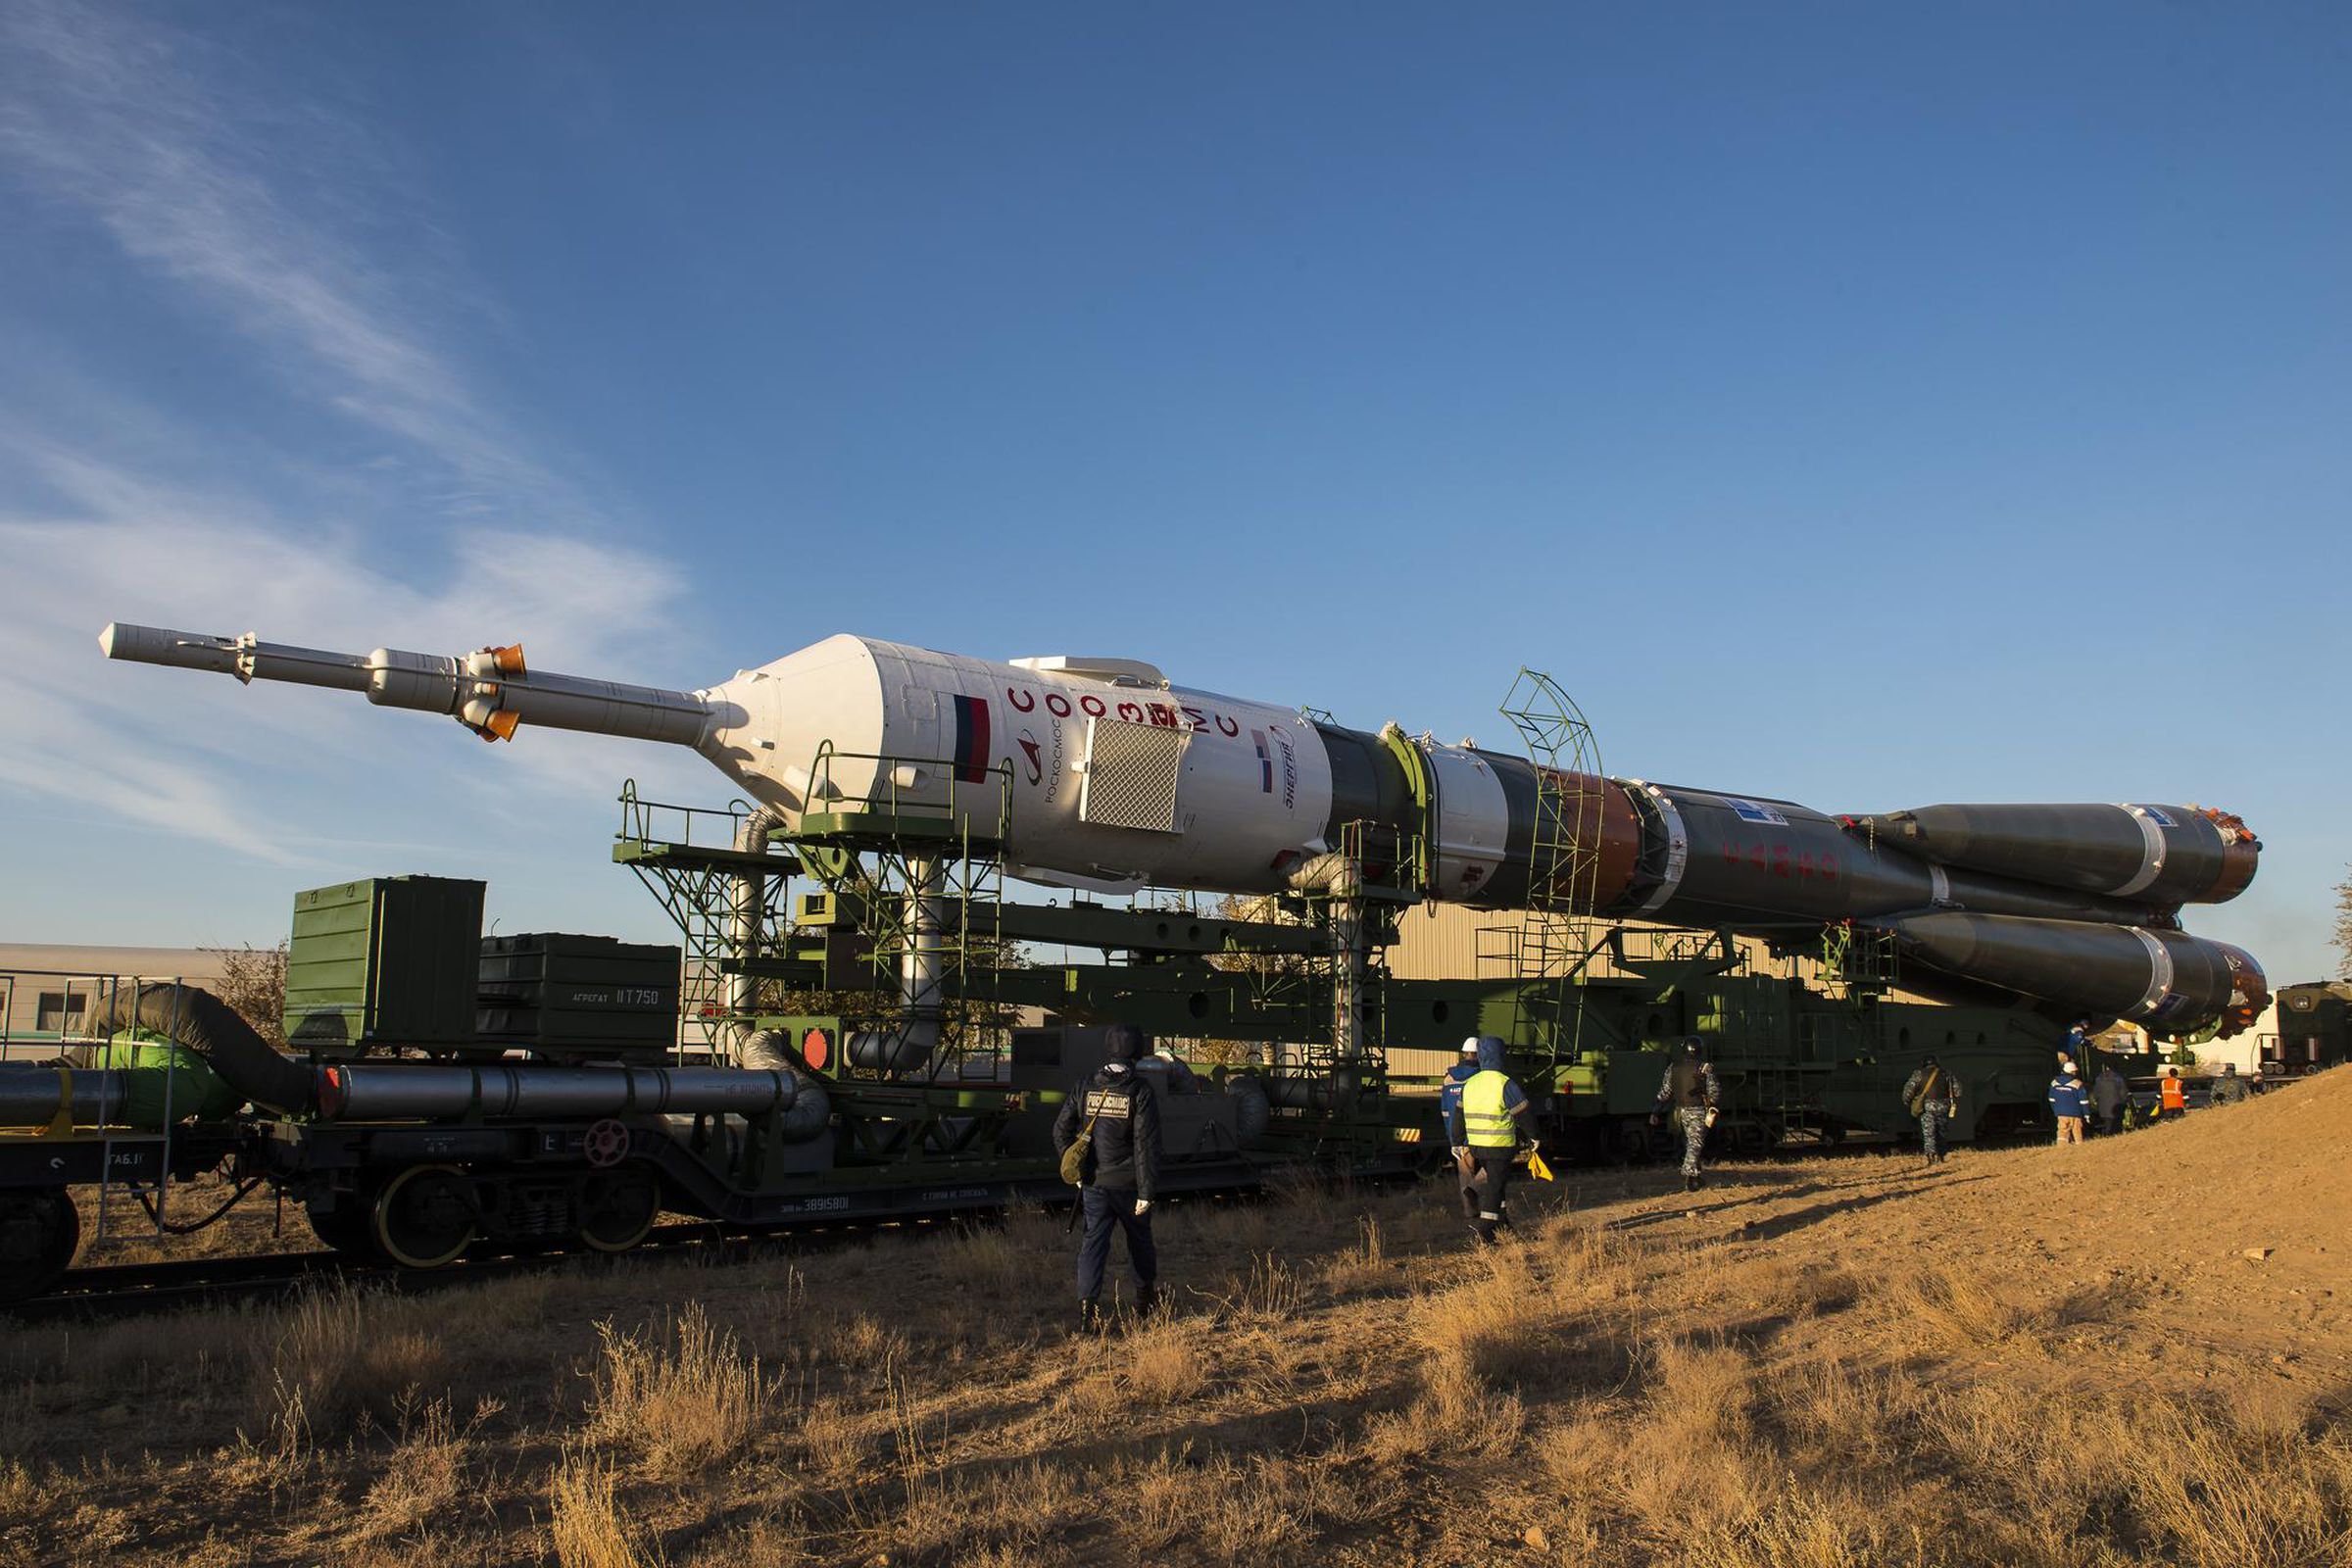 The Soyuz rocket rolling out to the pad.